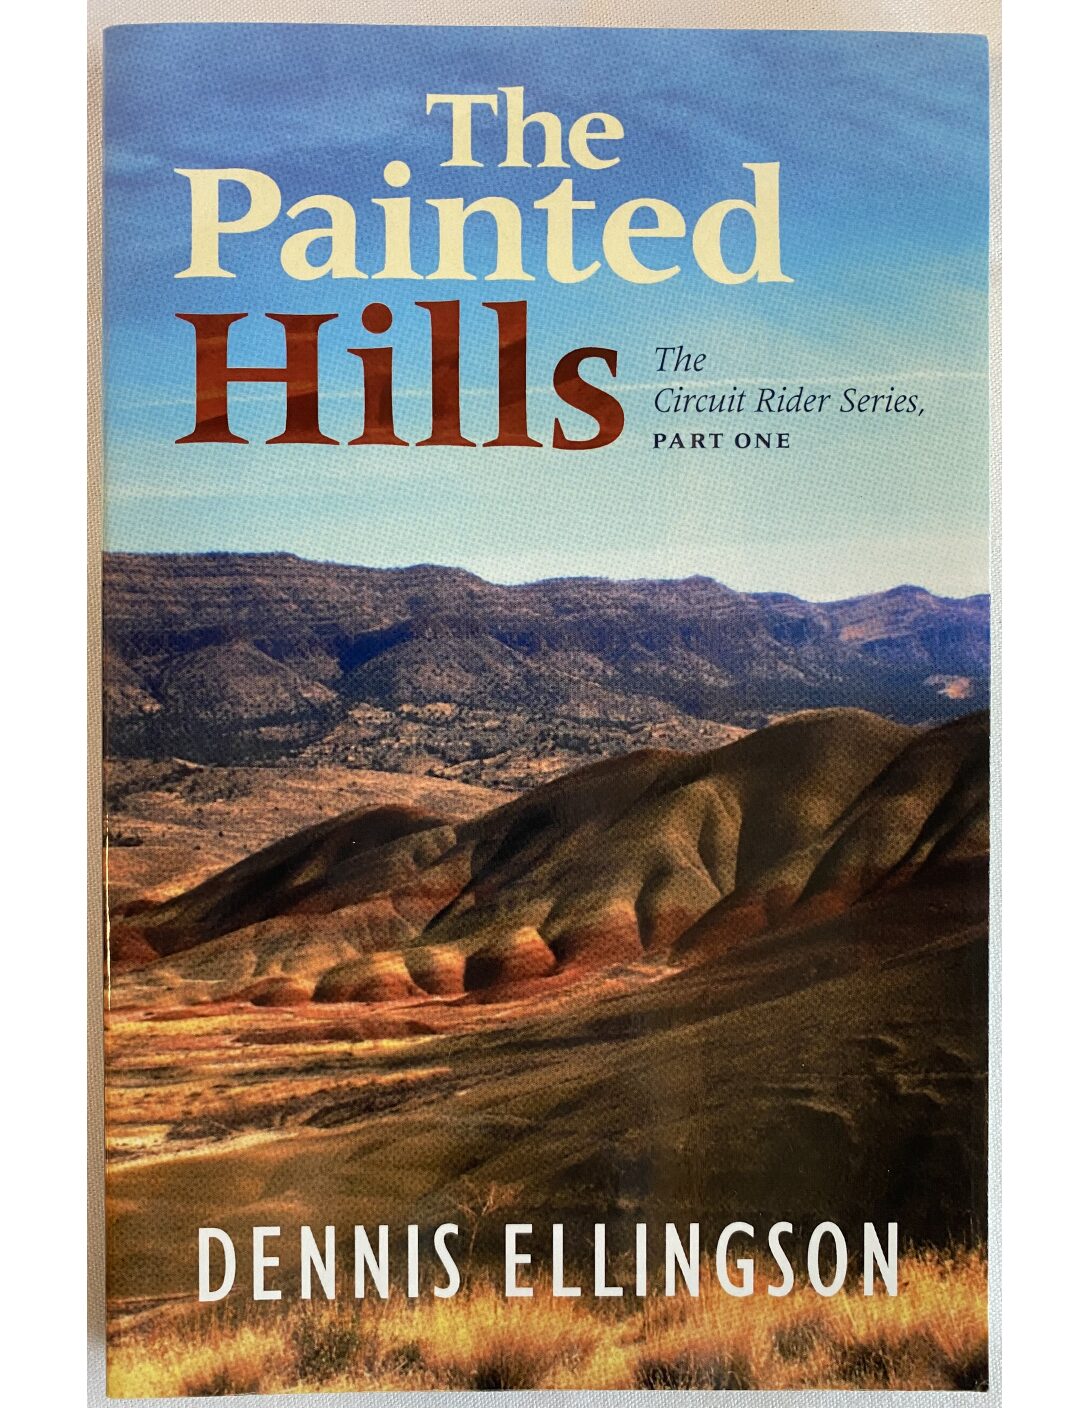 The Painted Hills, The Circuit Rider Series, Part 1 (Book)